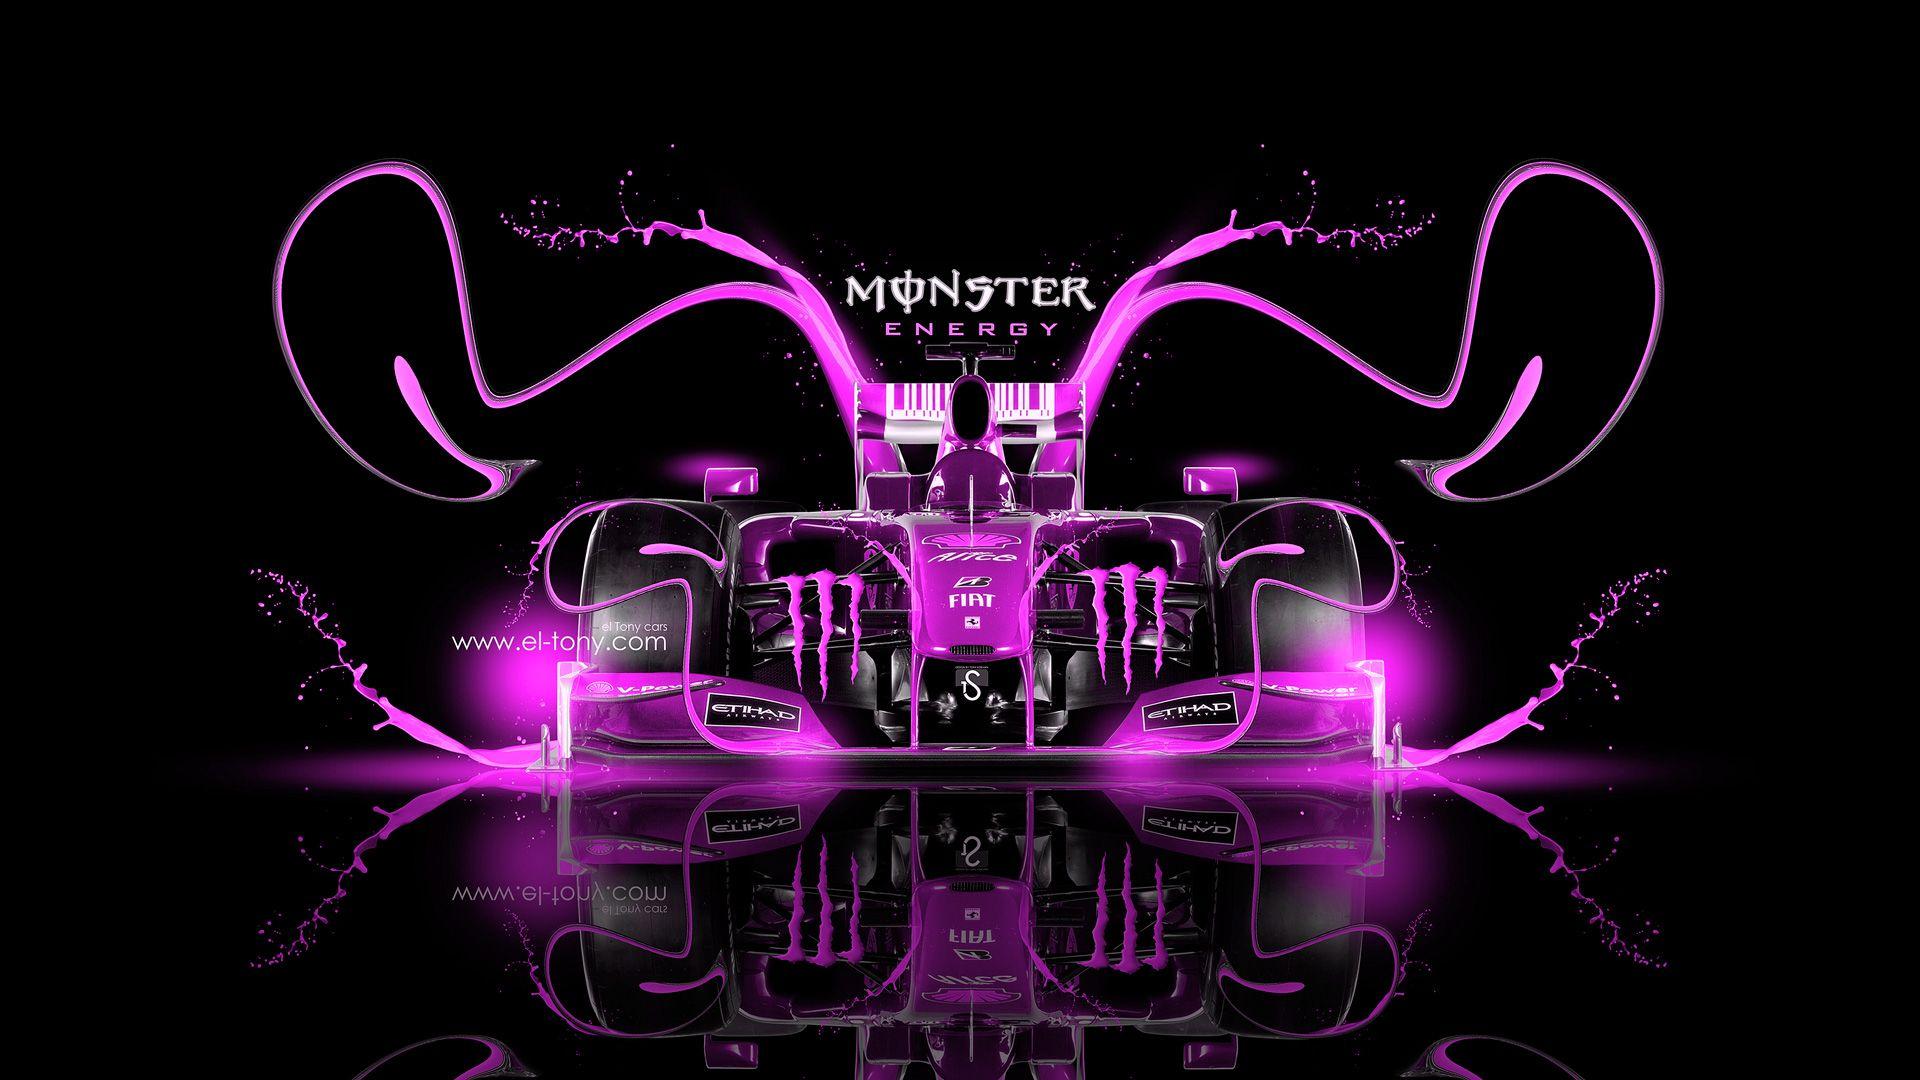 Purple Monster Energy Logo - Monster Energy Wallpapers, Pictures, Images